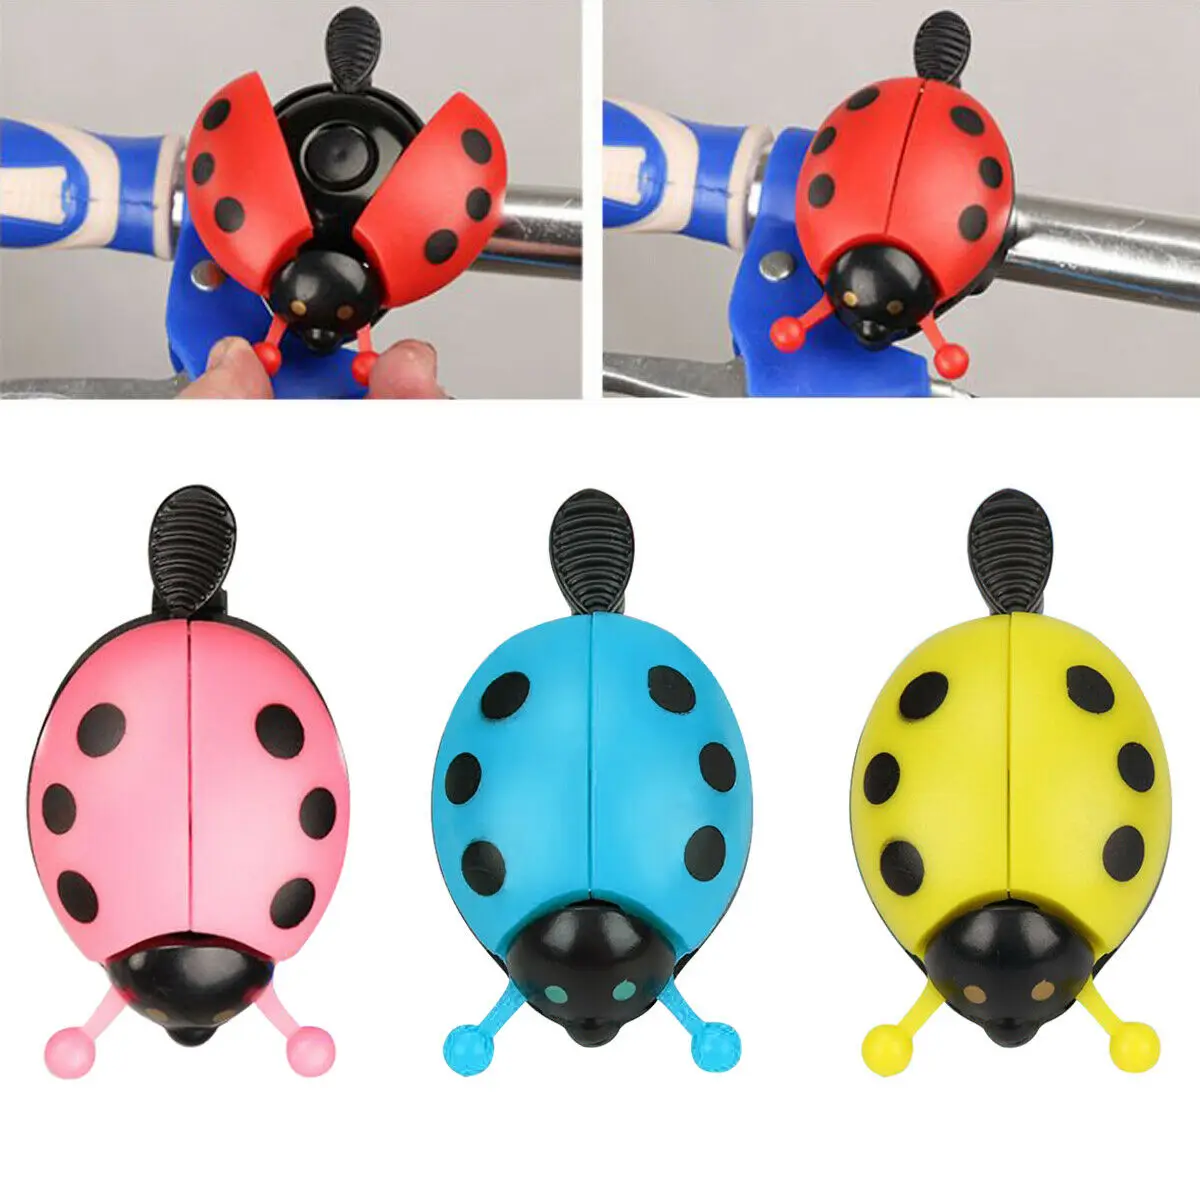 

Bicycle Bell Beetle Cartoon Cycling Bell Lovely Kids Funny Ladybug Bell Ring for Bike Ride Horn Bicycle Accessories